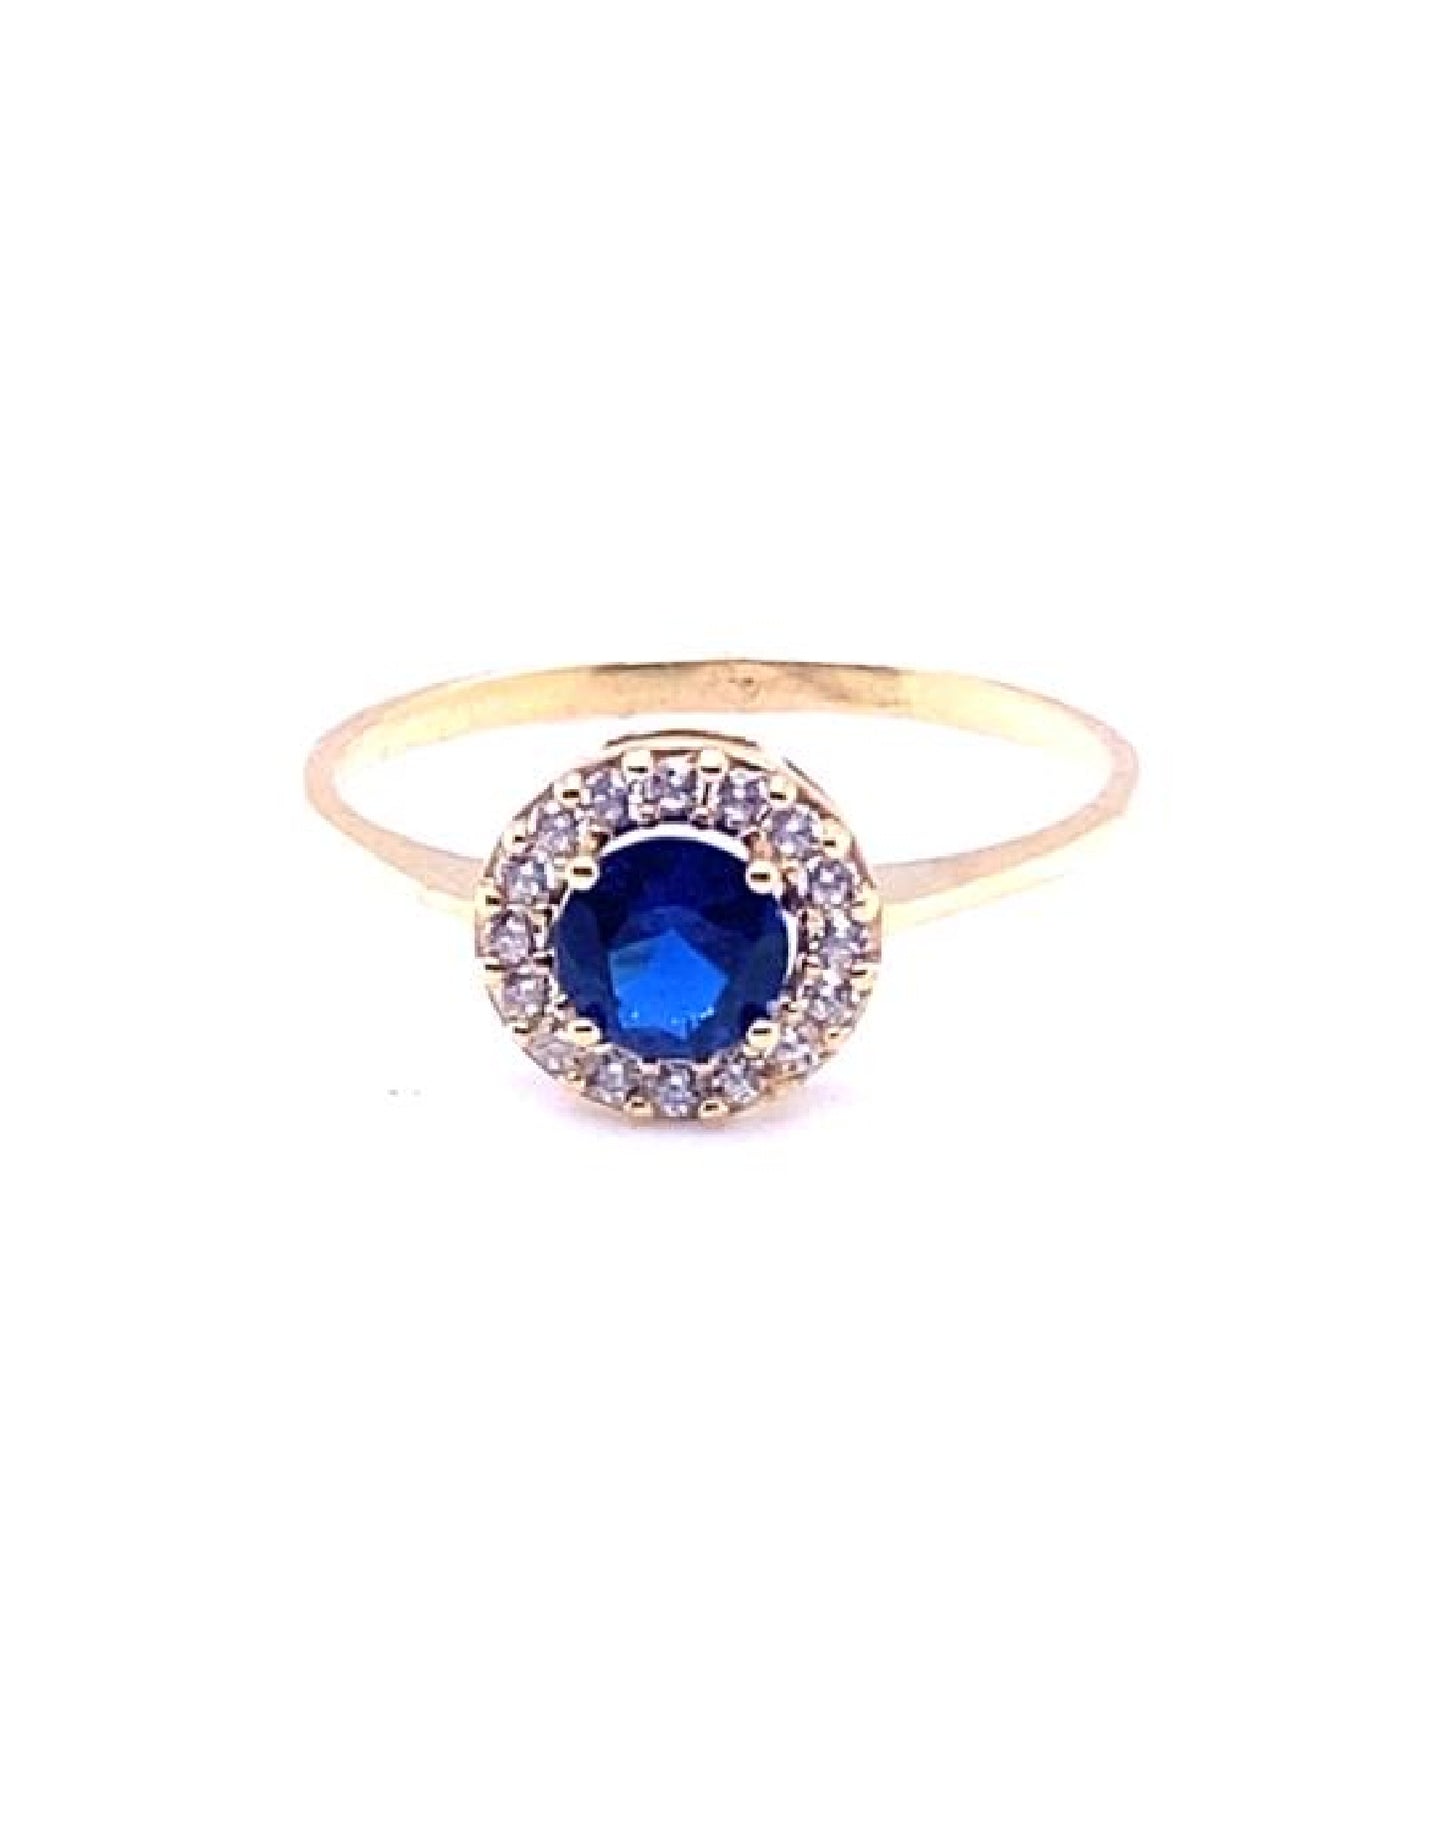 Gold 18Kt (750mls) Yellow/White Gold Blue & White Sapphires Ring Jewelry